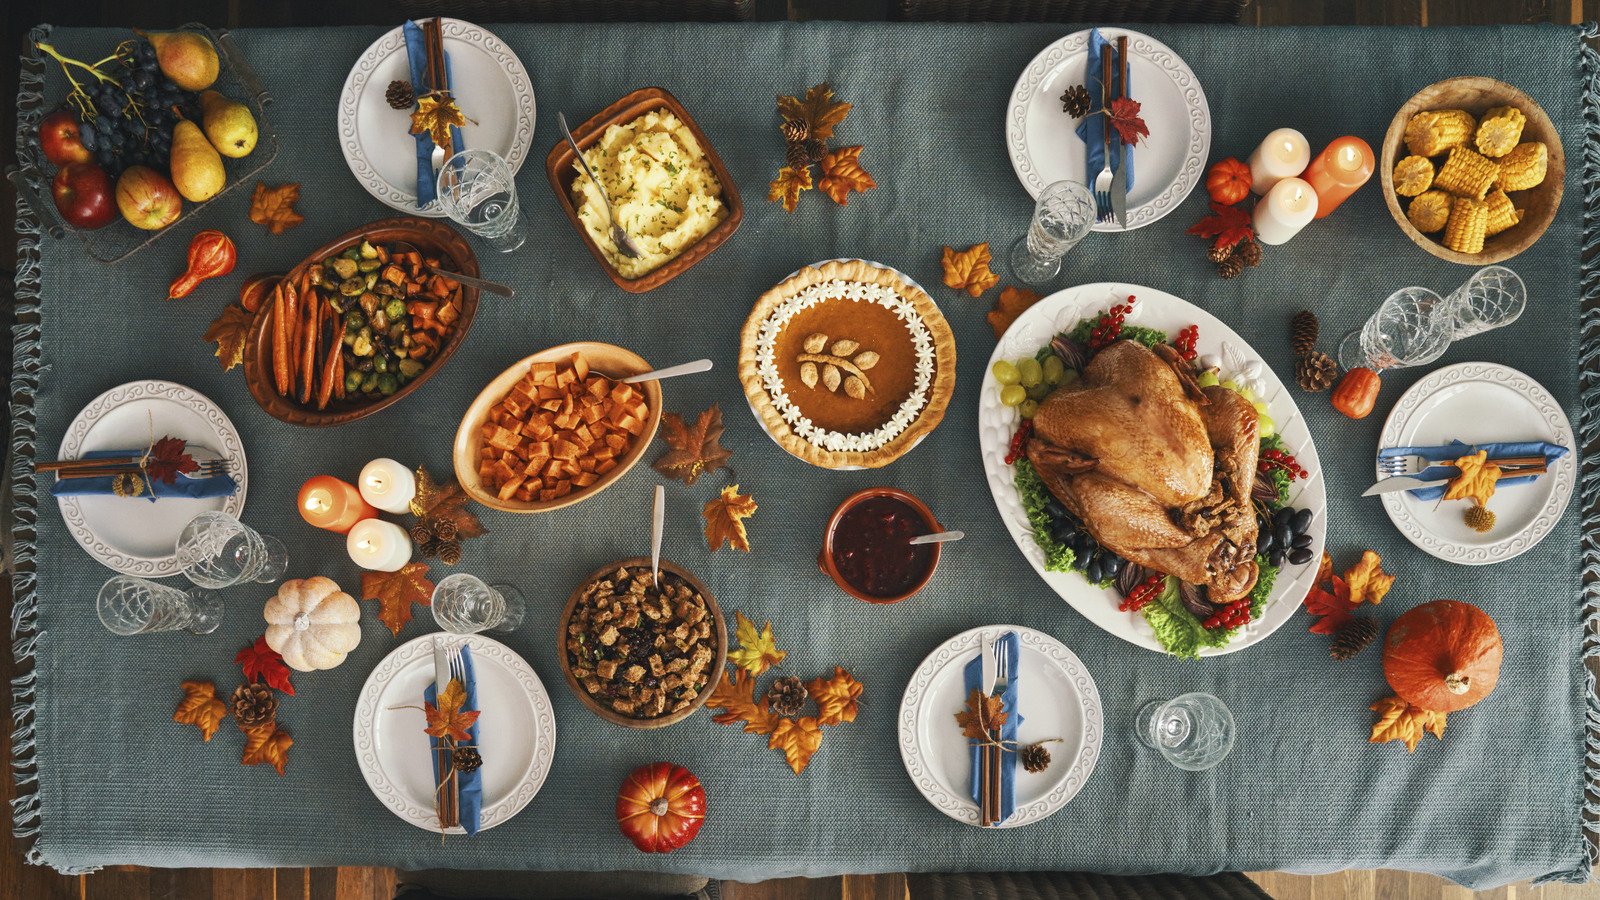 https://www.thedailymeal.com/img/gallery/12-common-mistakes-people-make-when-preparing-thanksgiving-dinner/l-intro-1699792738.jpg